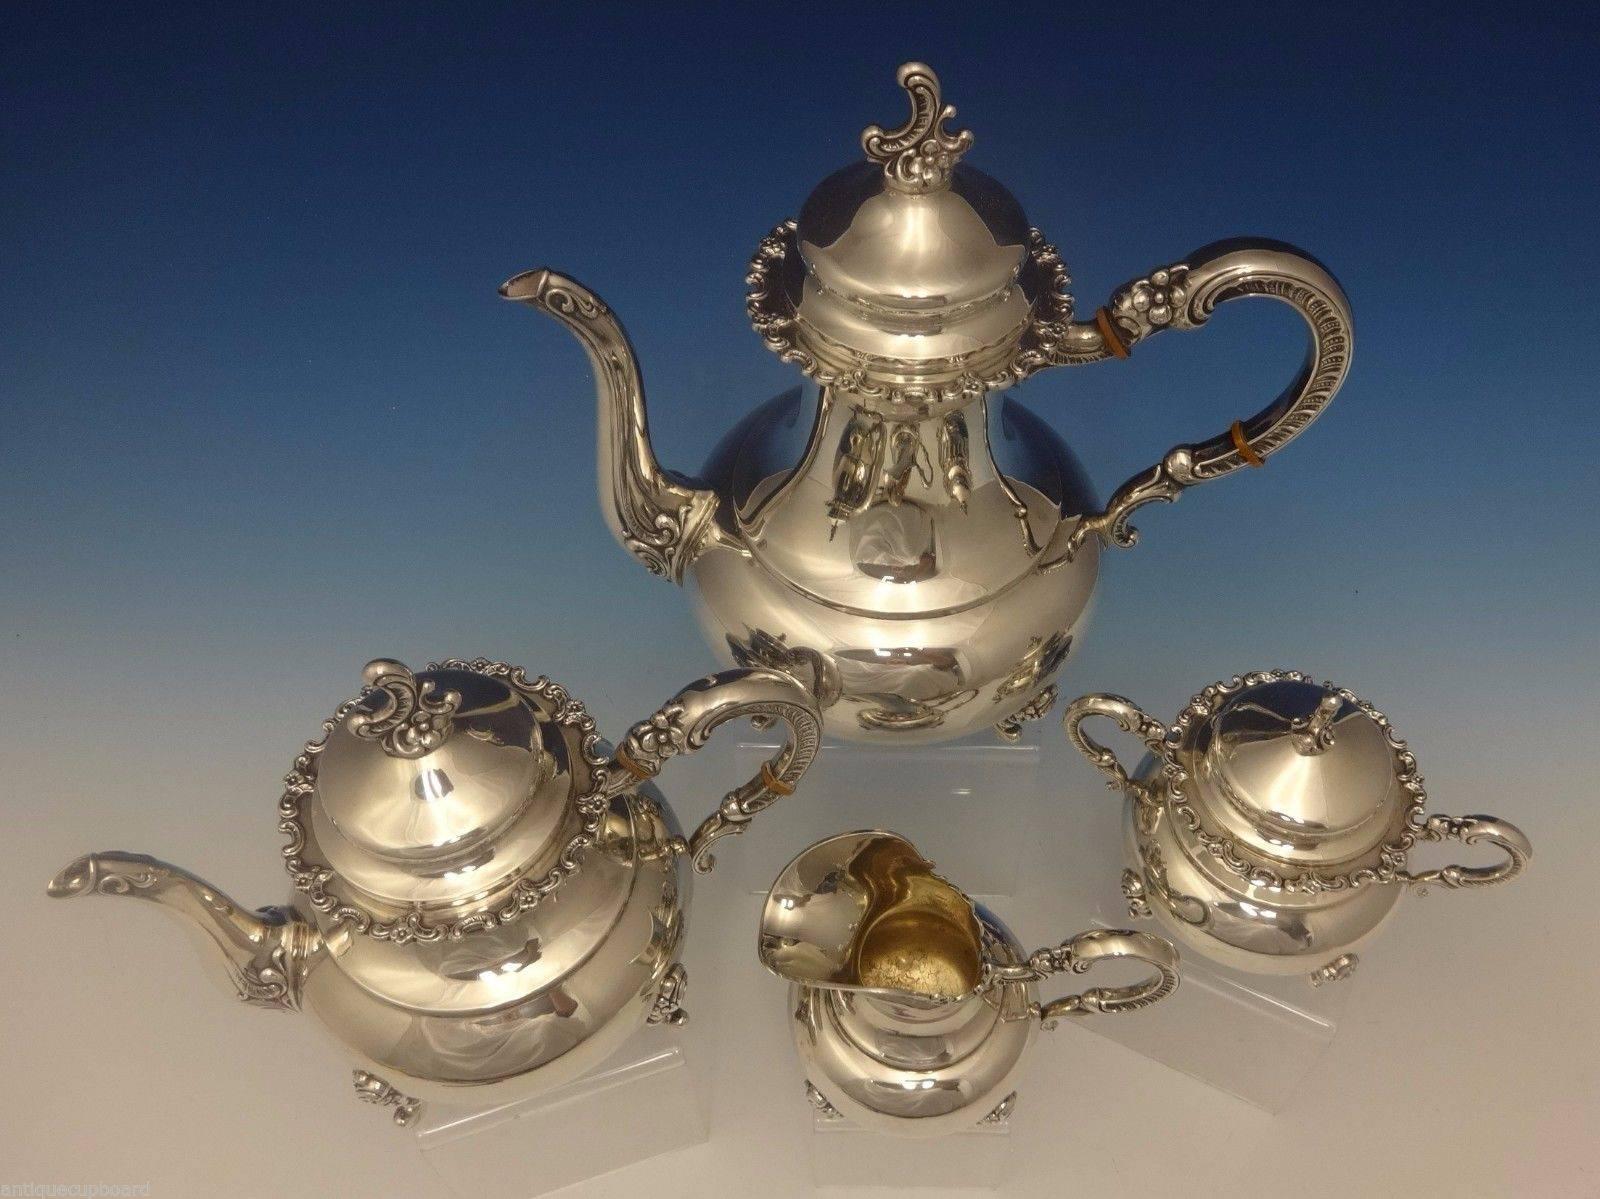 Heidelberg.

Heidelberg of Germany sterling silver four-piece tea set. It features applied Rococo swirls and flowers on the rim, feet, handles, and finials. The set includes:

Coffee pot: Measures 11